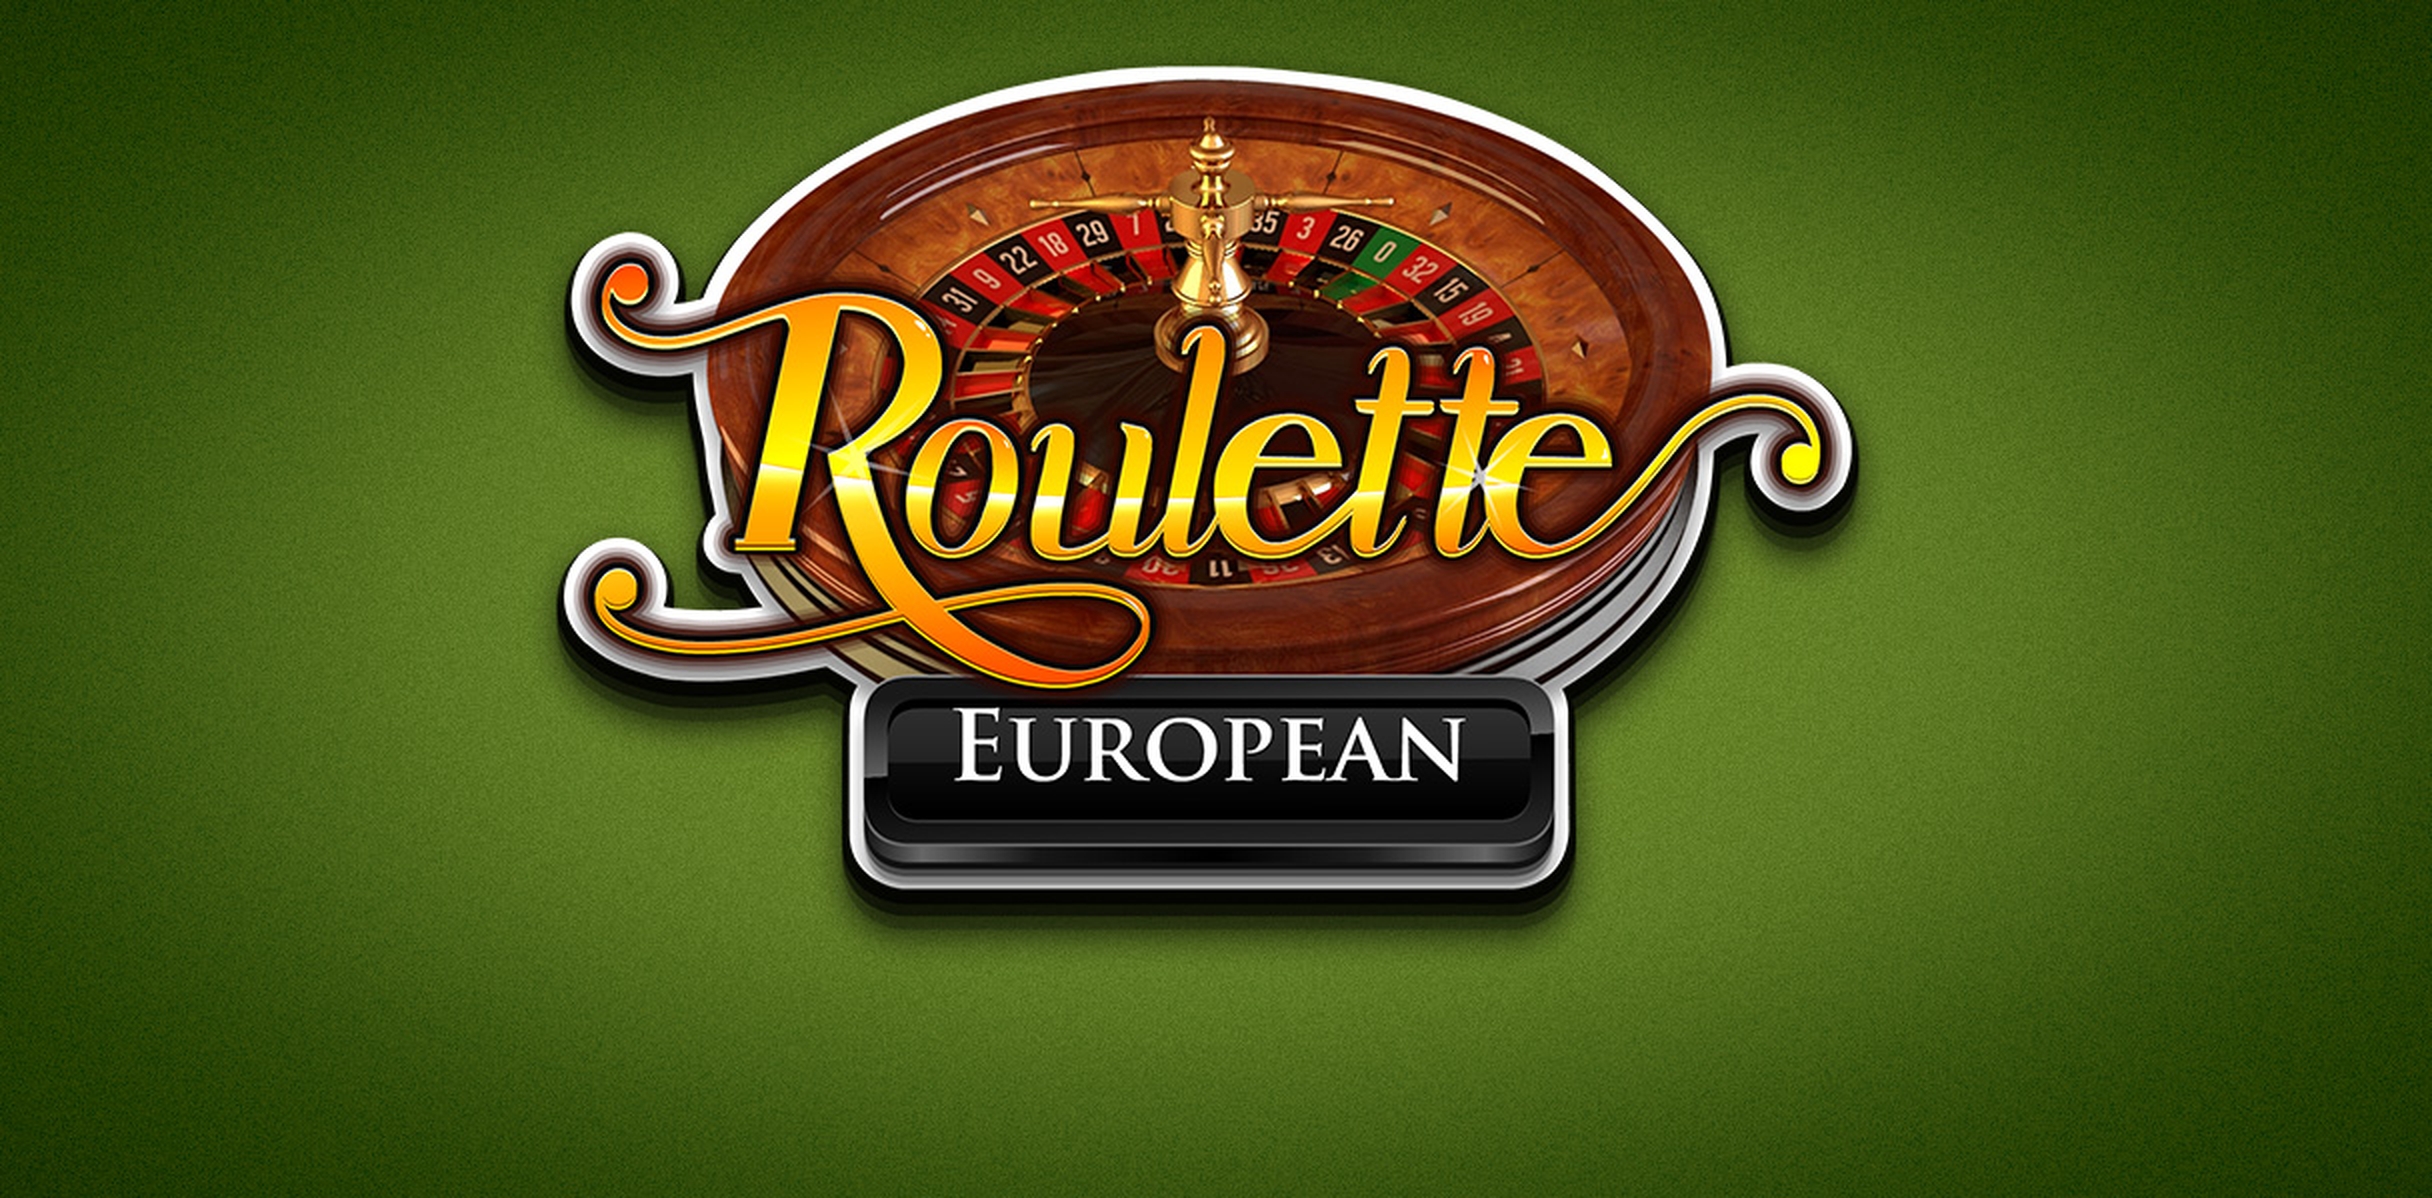 The European Roulette Online Slot Demo Game by Red Rake Gaming